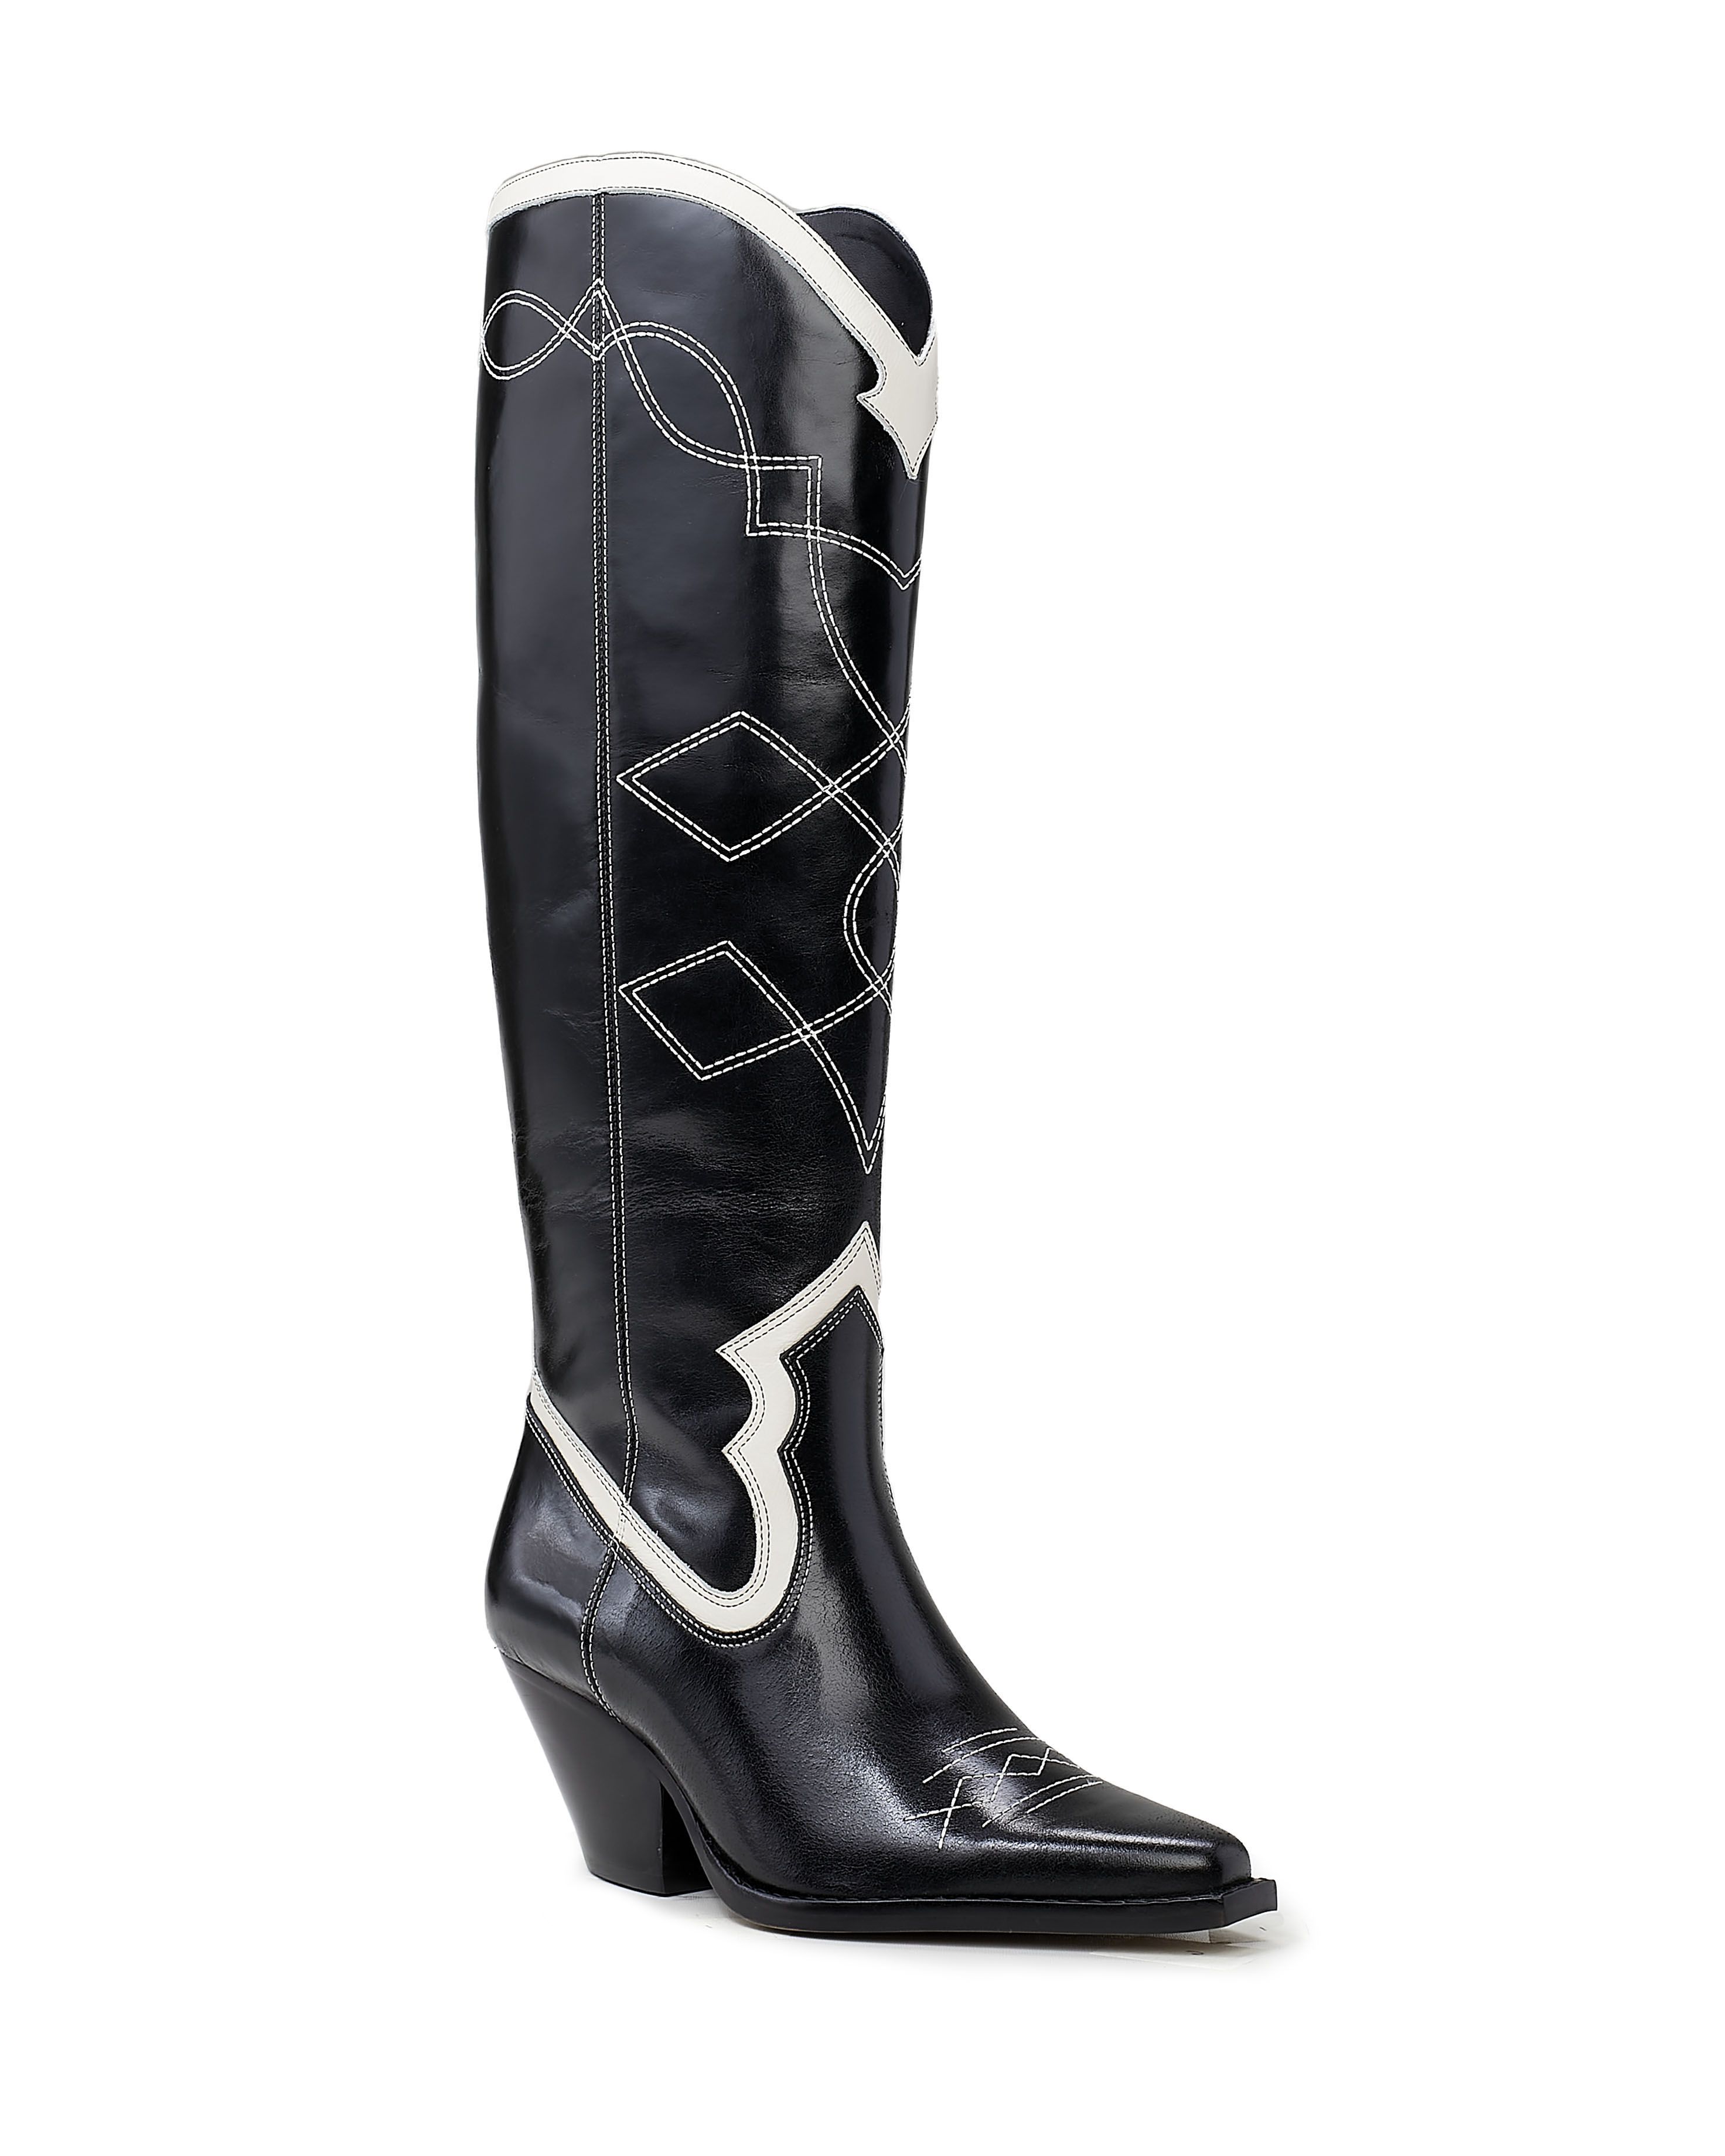 Vince Camuto Nedema Boot | Vince Camuto